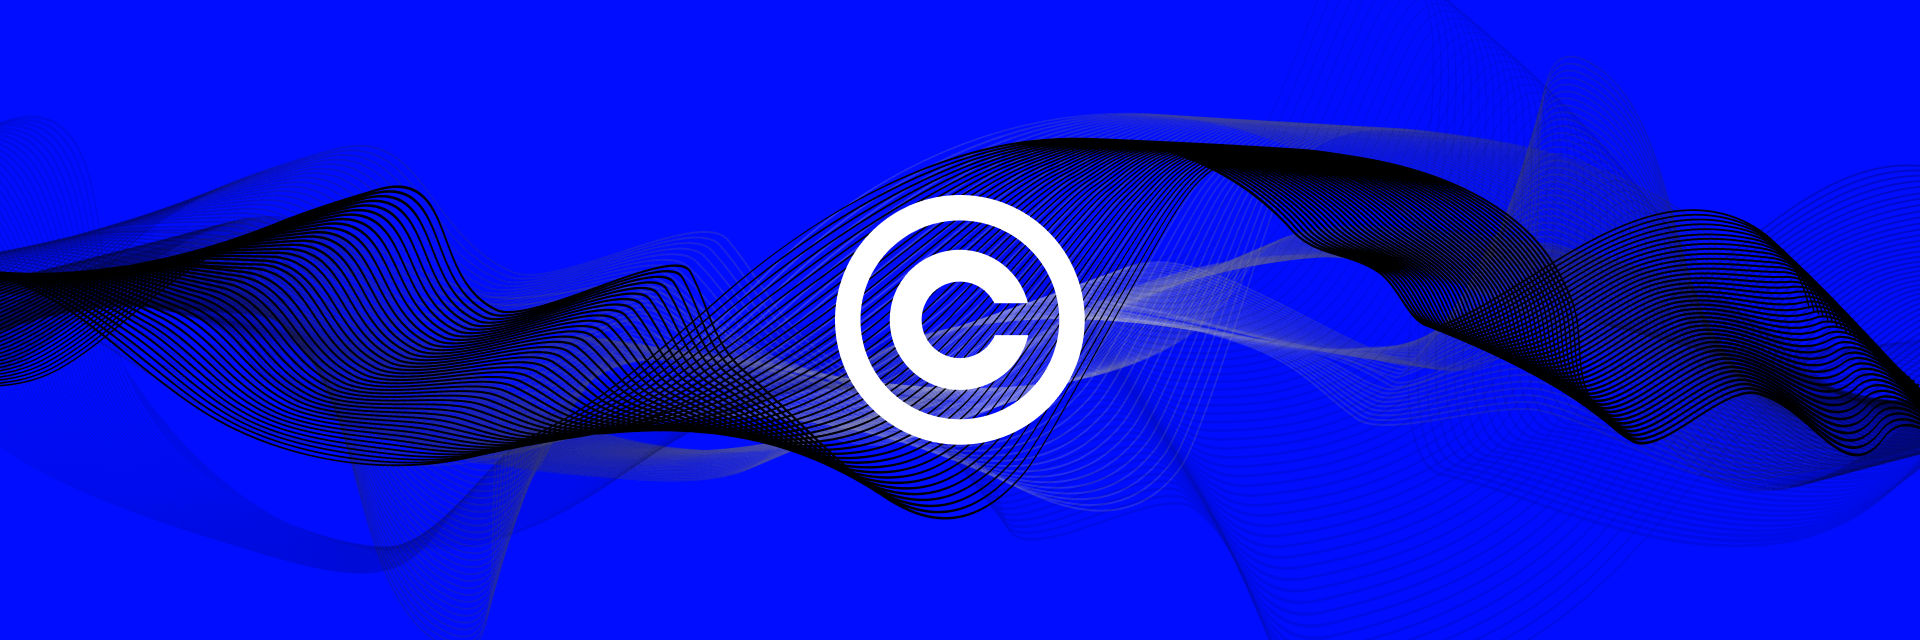 How To Check If a Song Is Copyrighted? — Mubert Blog